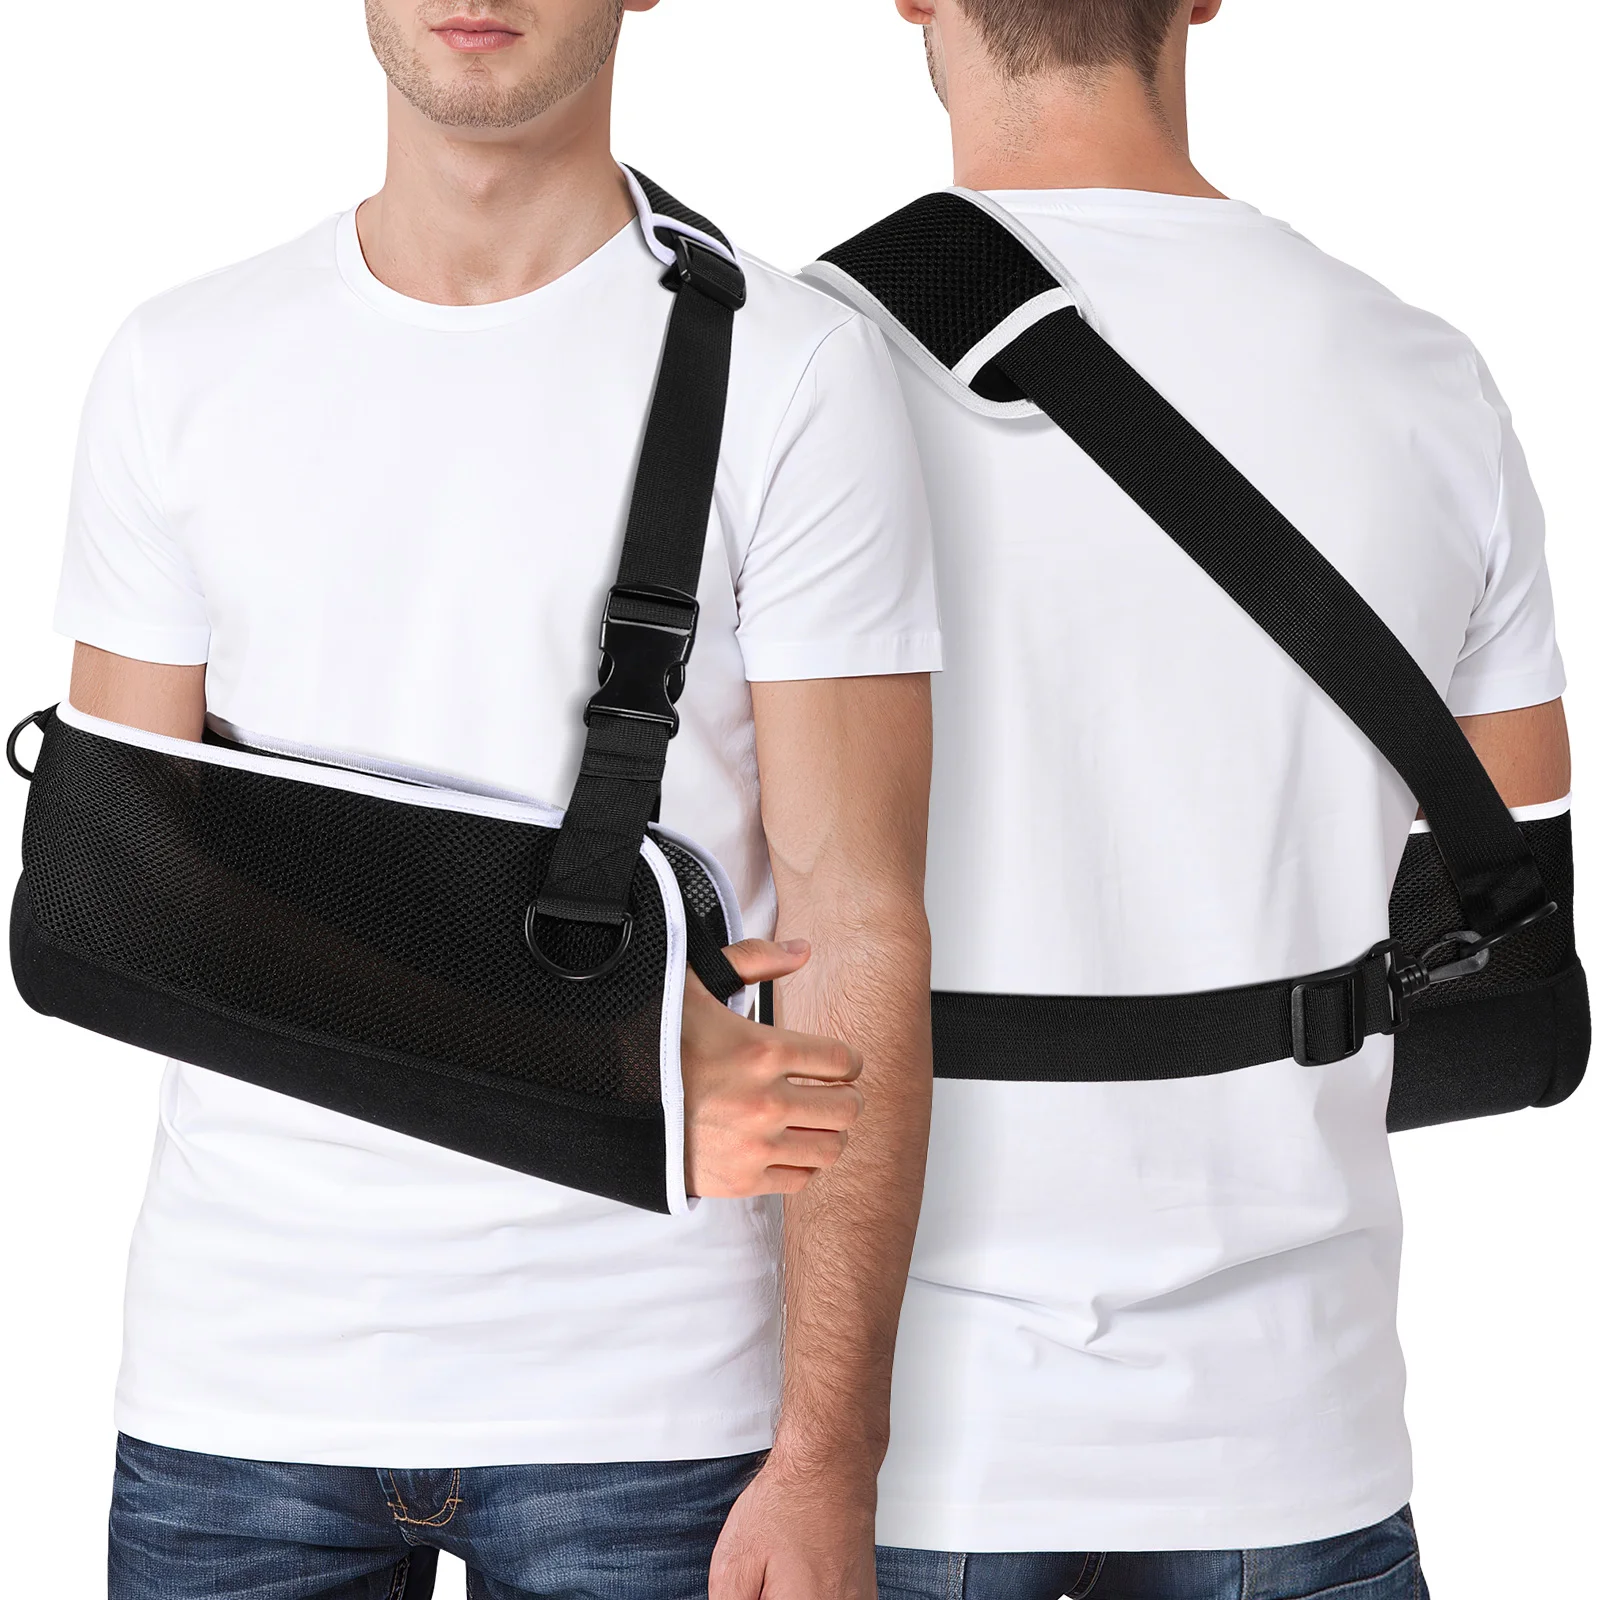 1pc reusable arm sling for elbow injury